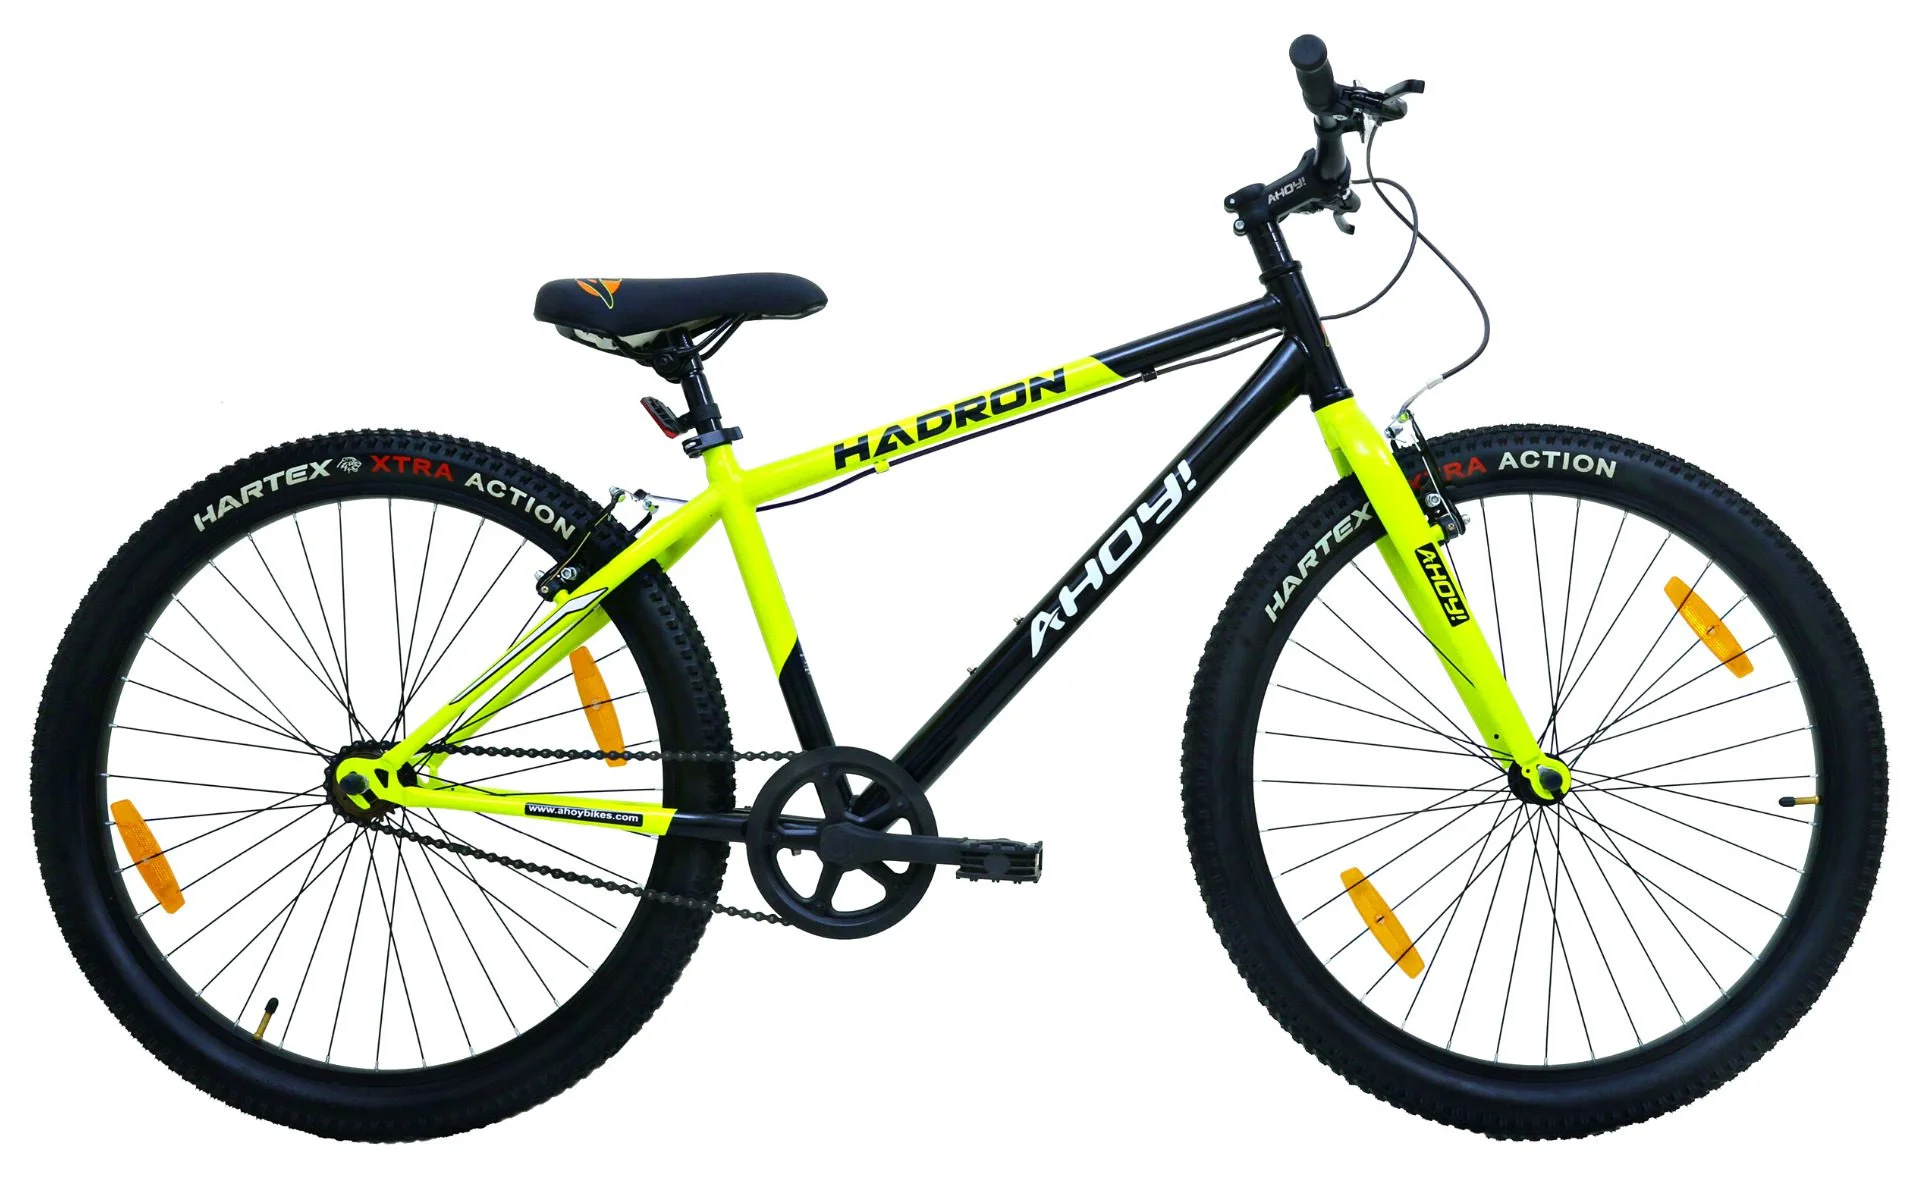 Hadron All Terrain Bike 27.5T | Buy Yellow Non Gear Cycle for Men